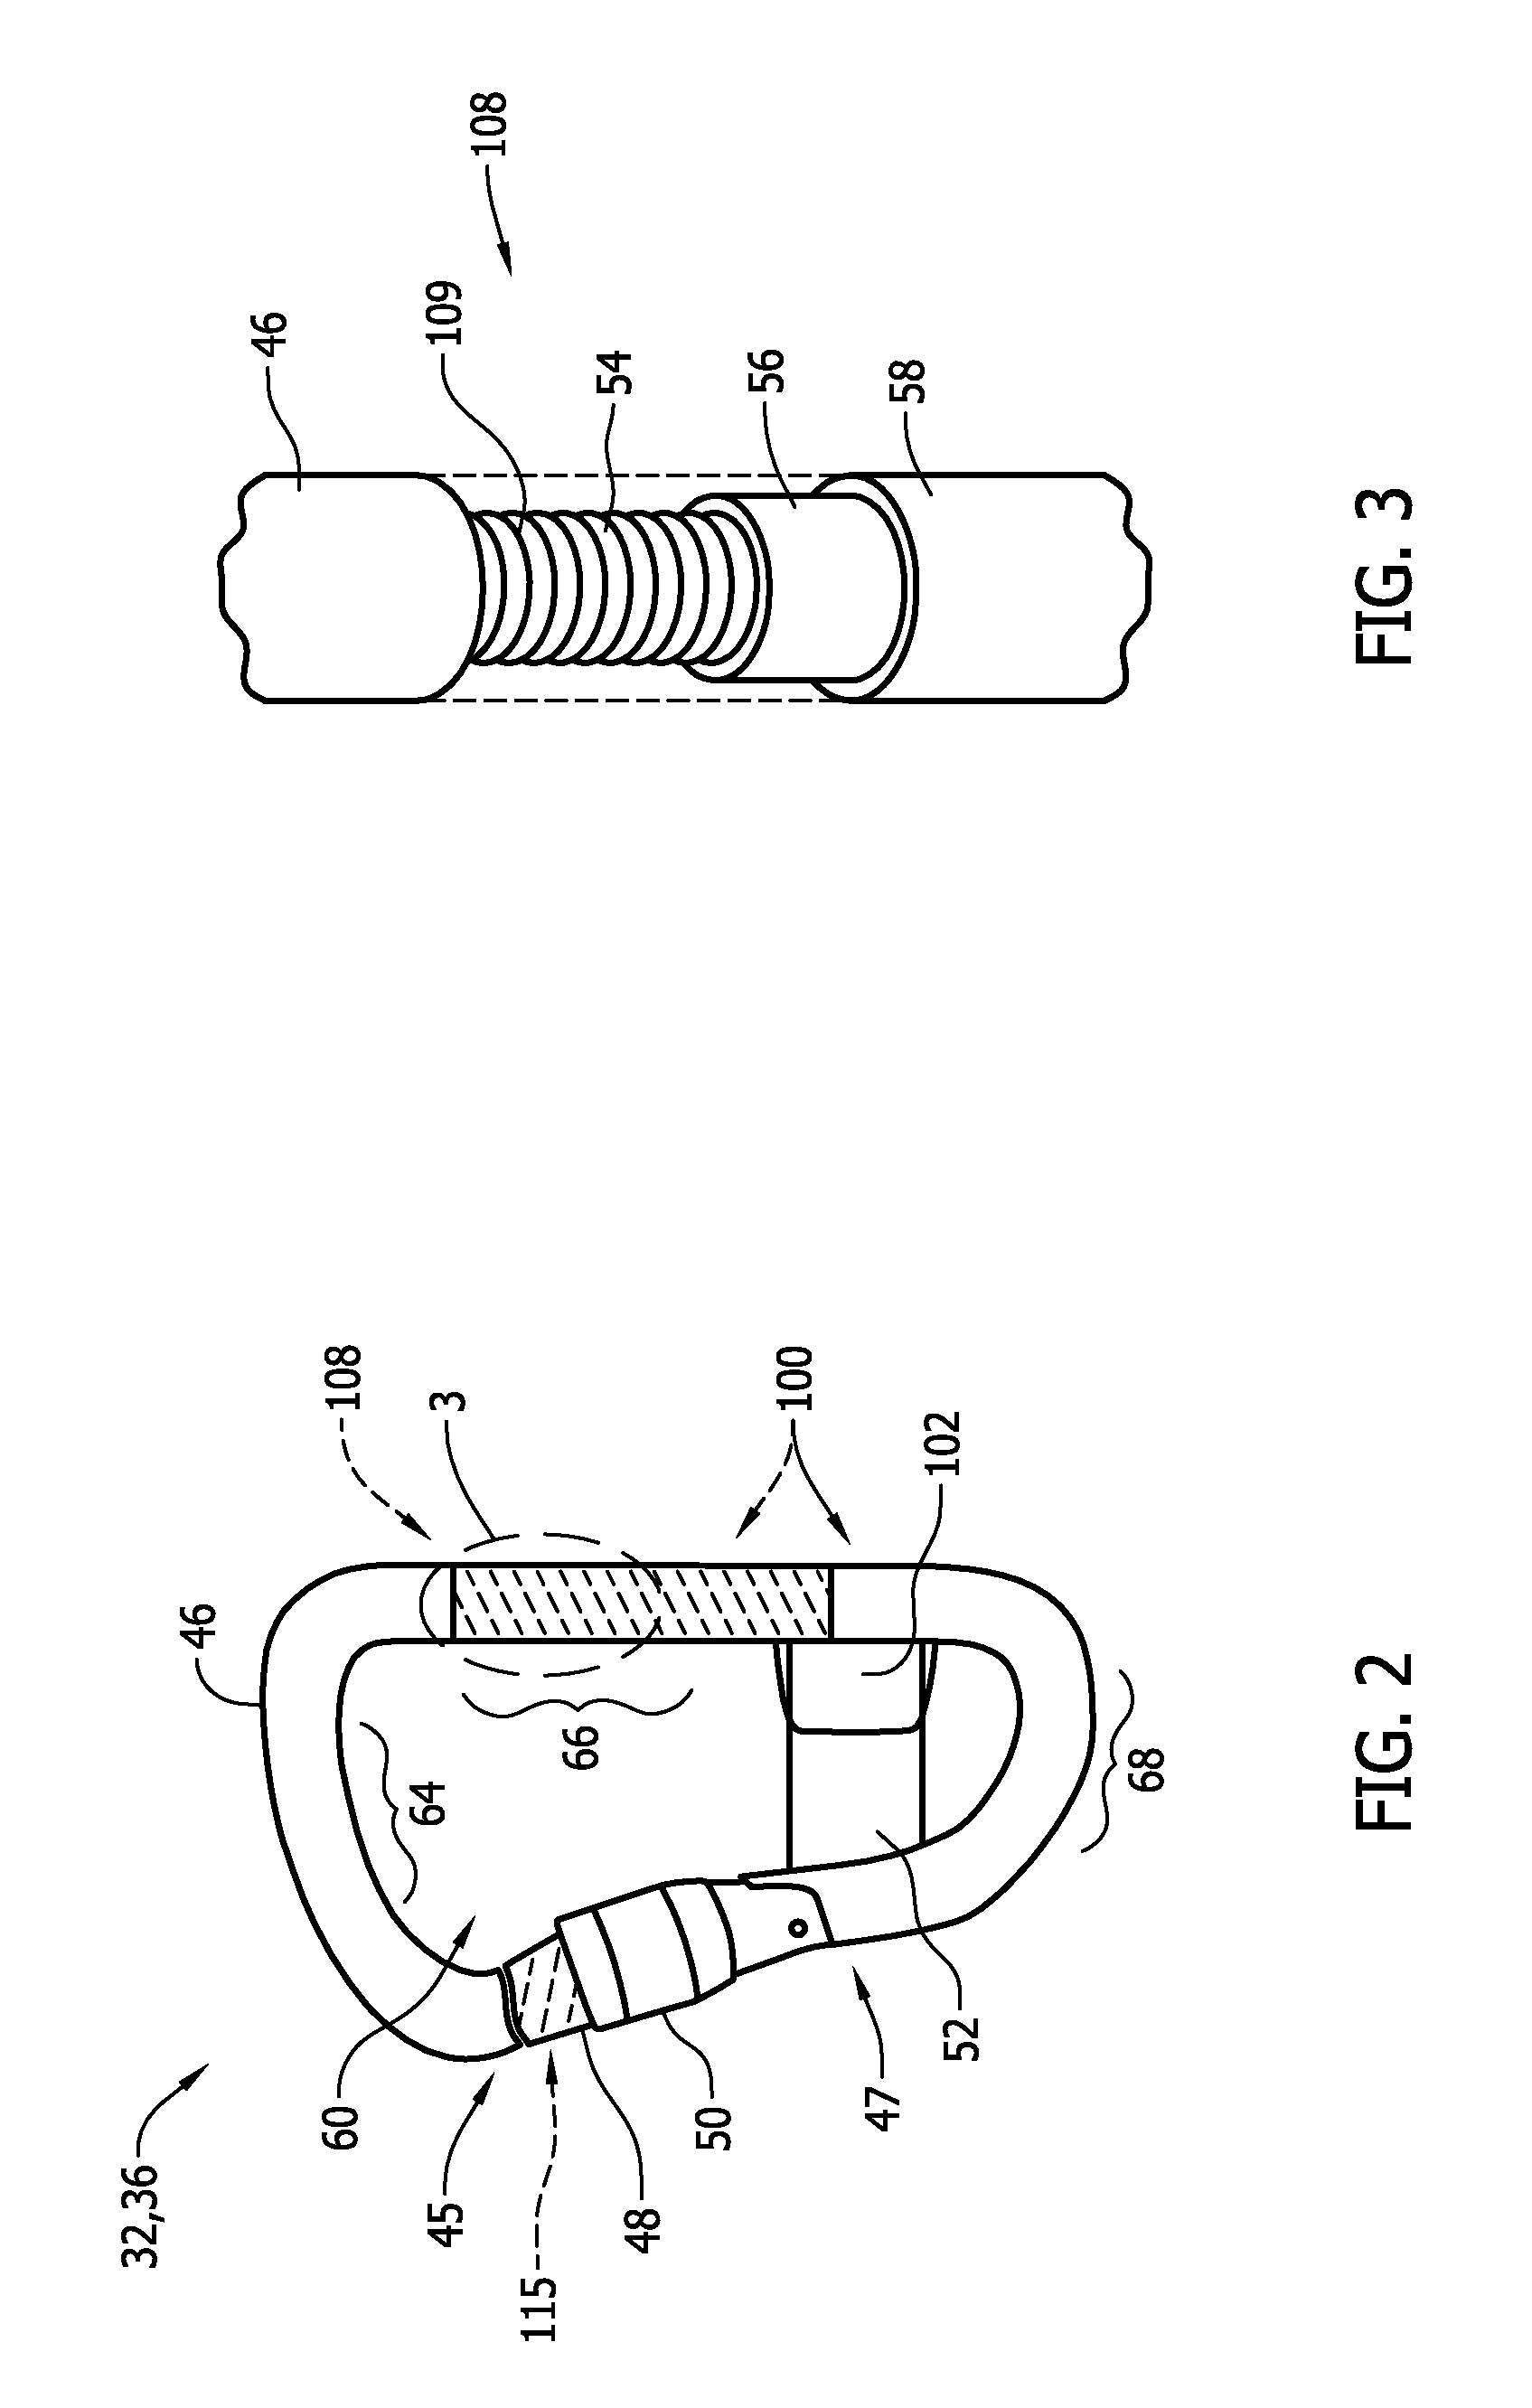 Line connector having a link detection system and method of making same